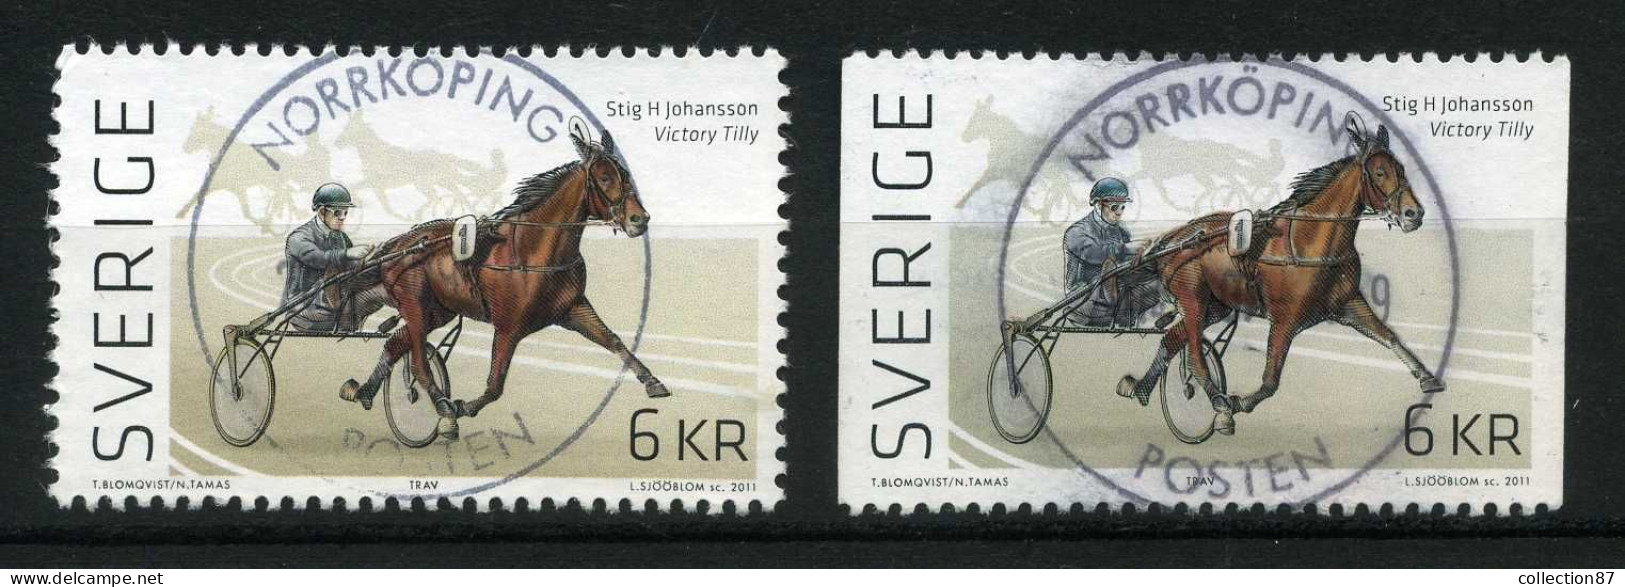 Réf 77 < -- SUEDE 2011 < Yvert N° 2818 + 2818a Dent 4 Cotés Ø < Mi 2843 Ø Used -- > Horse Cheval De Trot Victory Tilly - Used Stamps